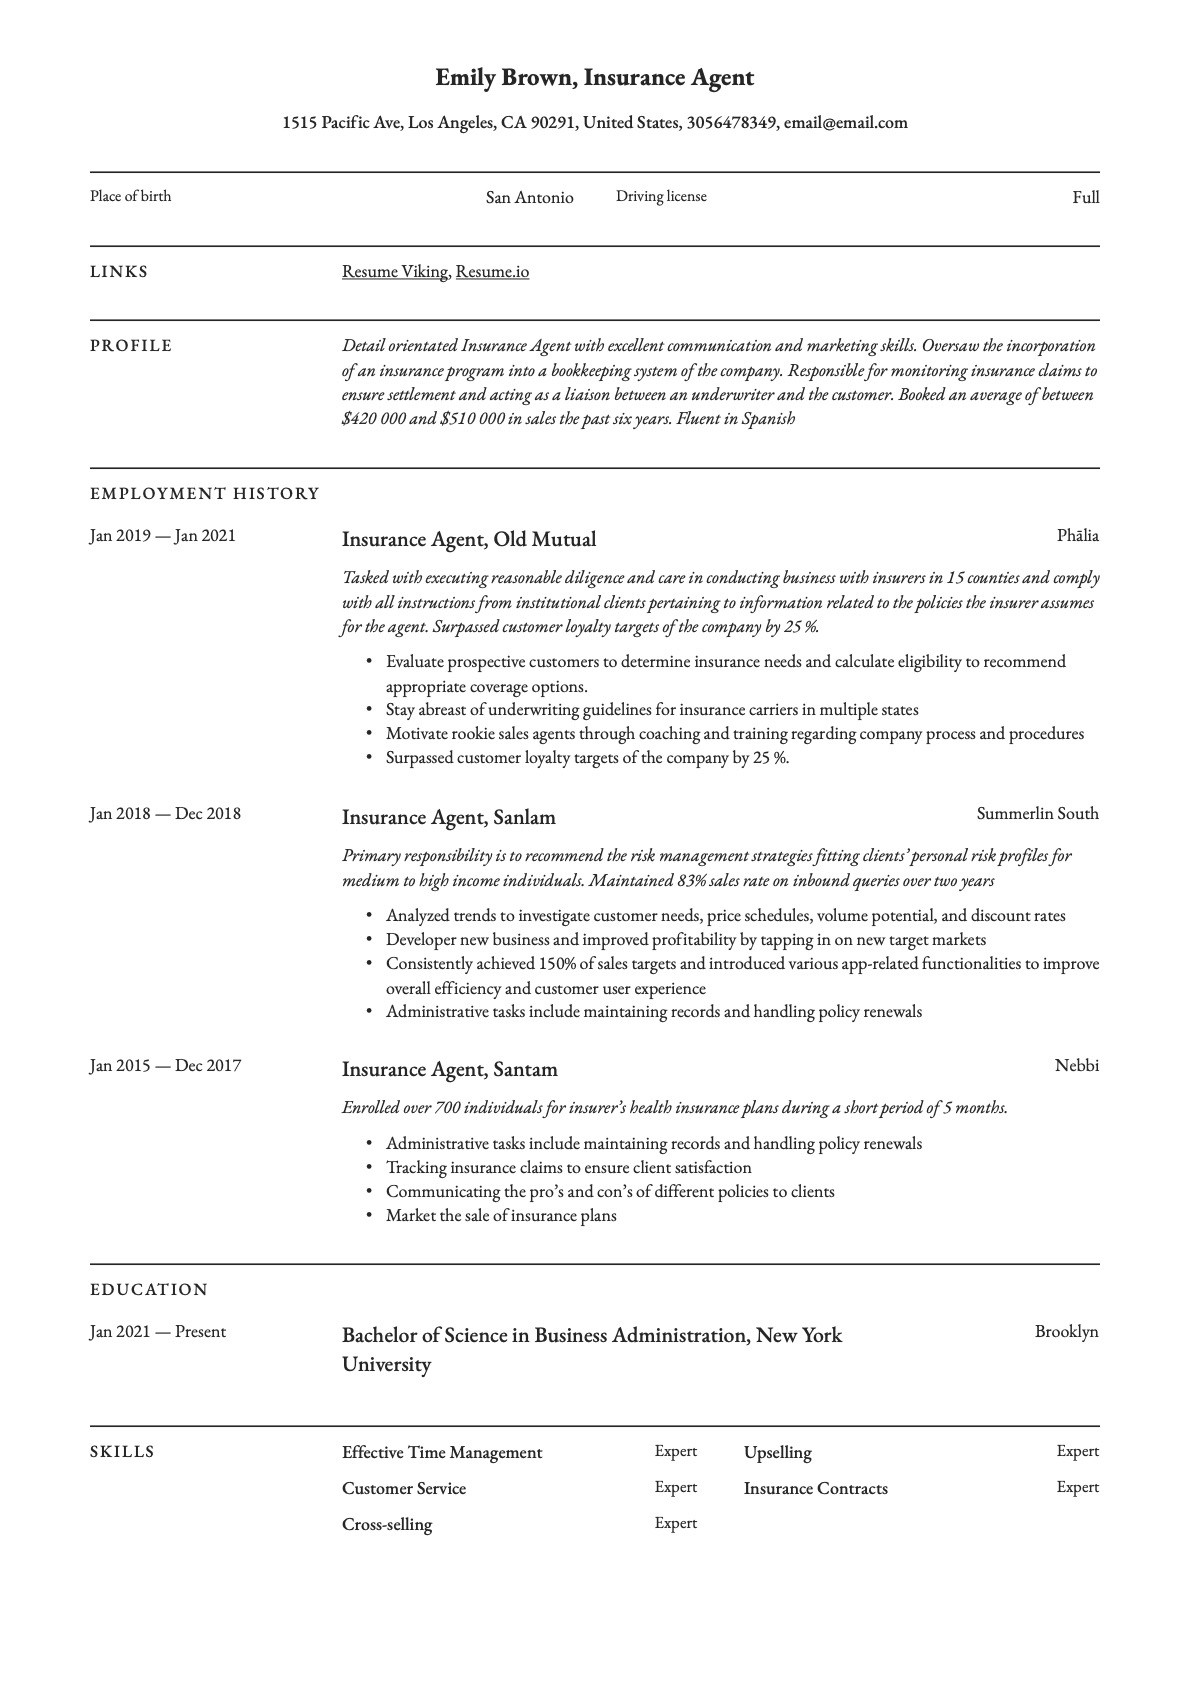 Example resume insurance agent-5